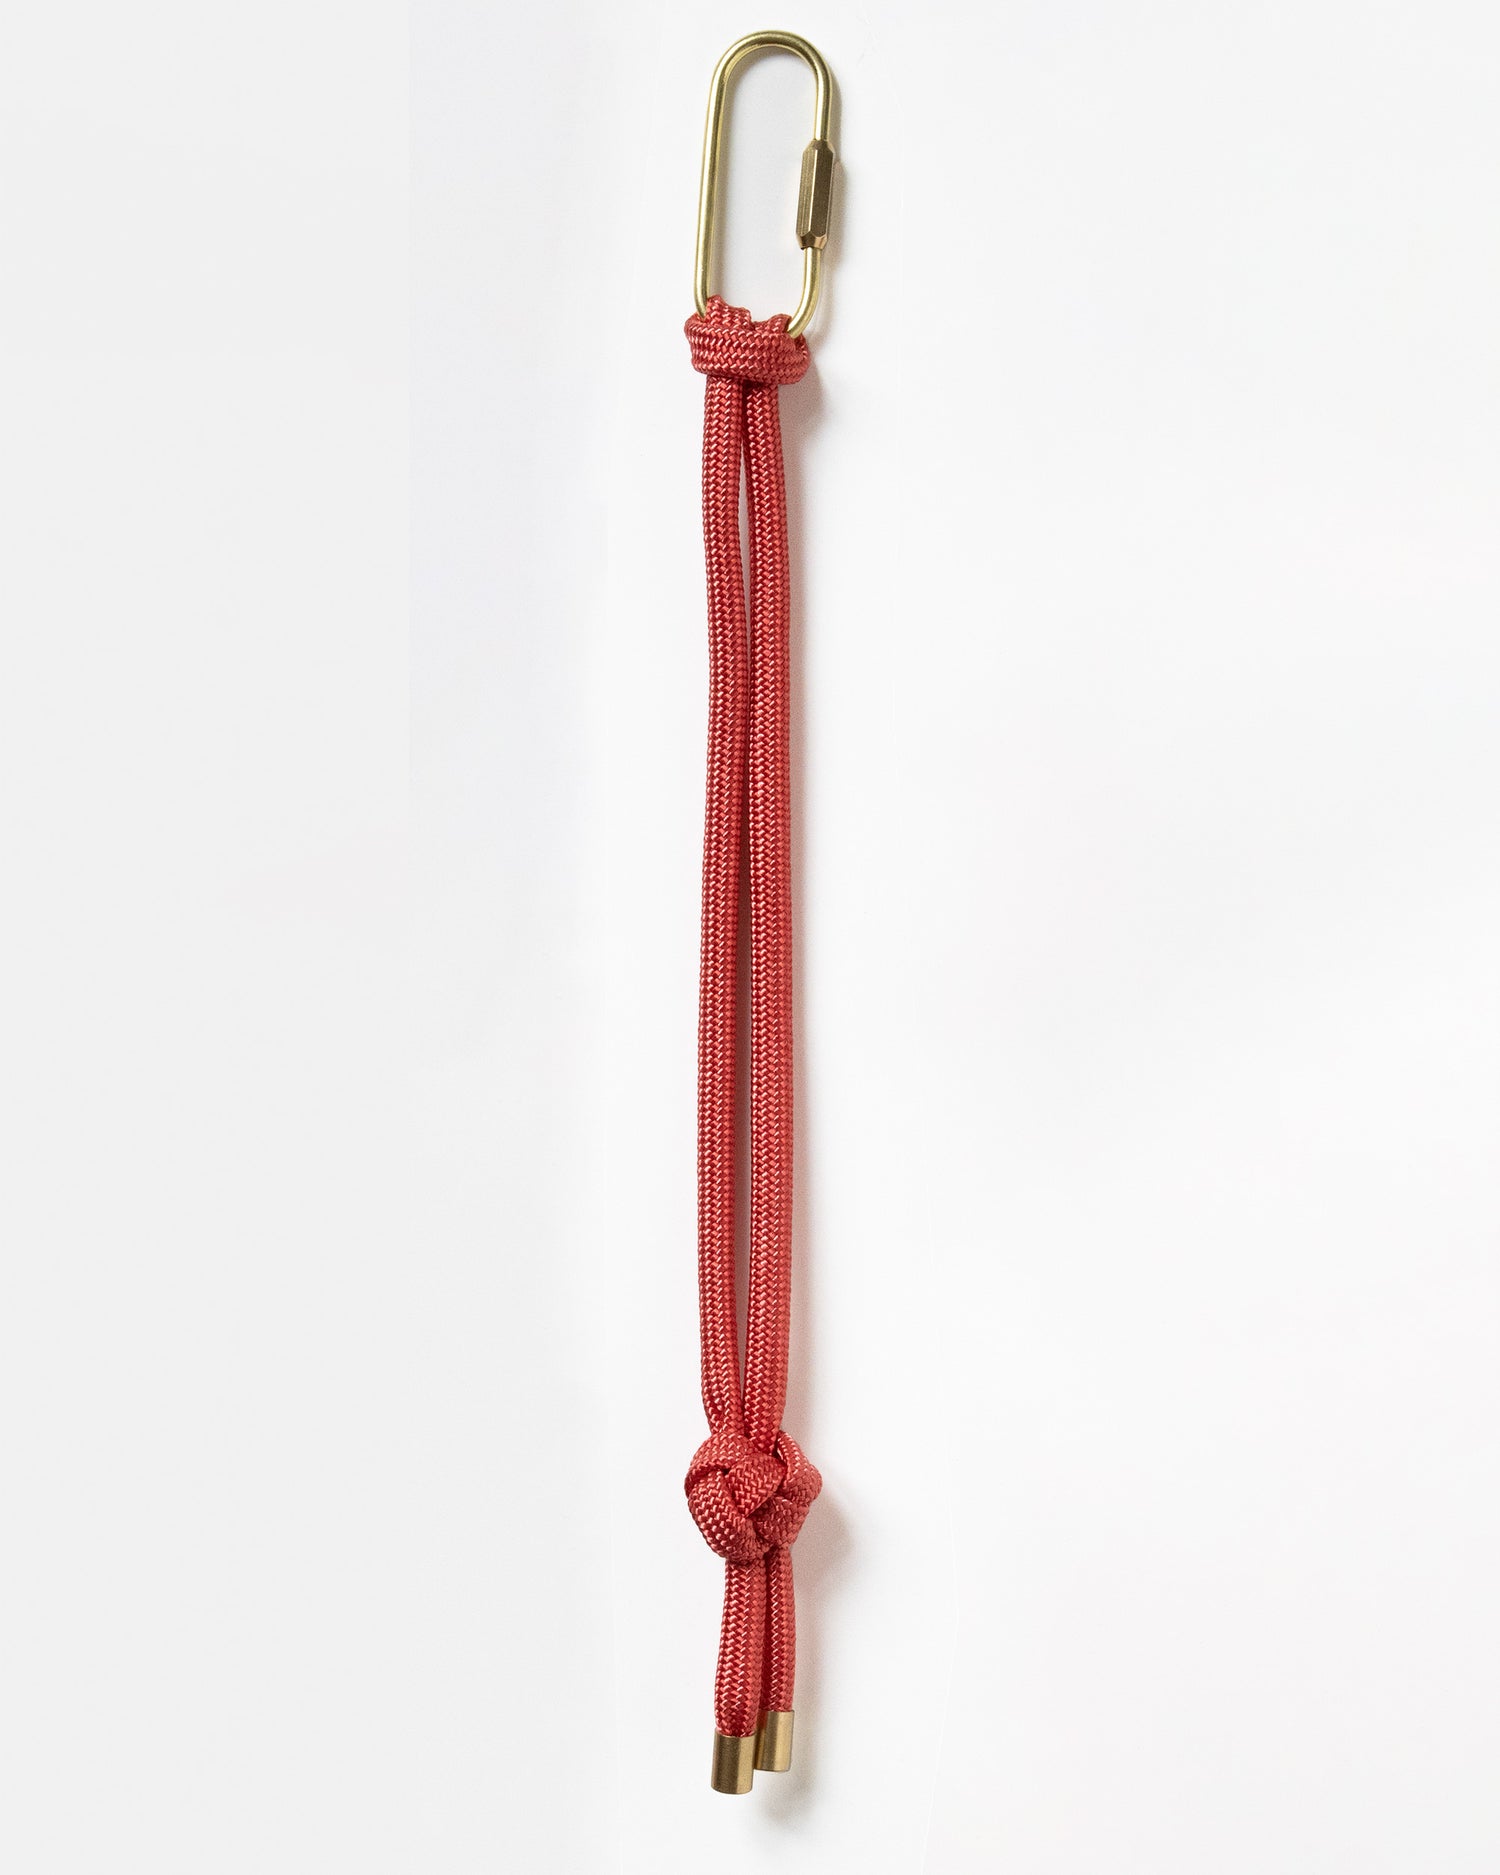 hand knotted recycled rope keychain with brass finishings and carabiner in Zinnia Red